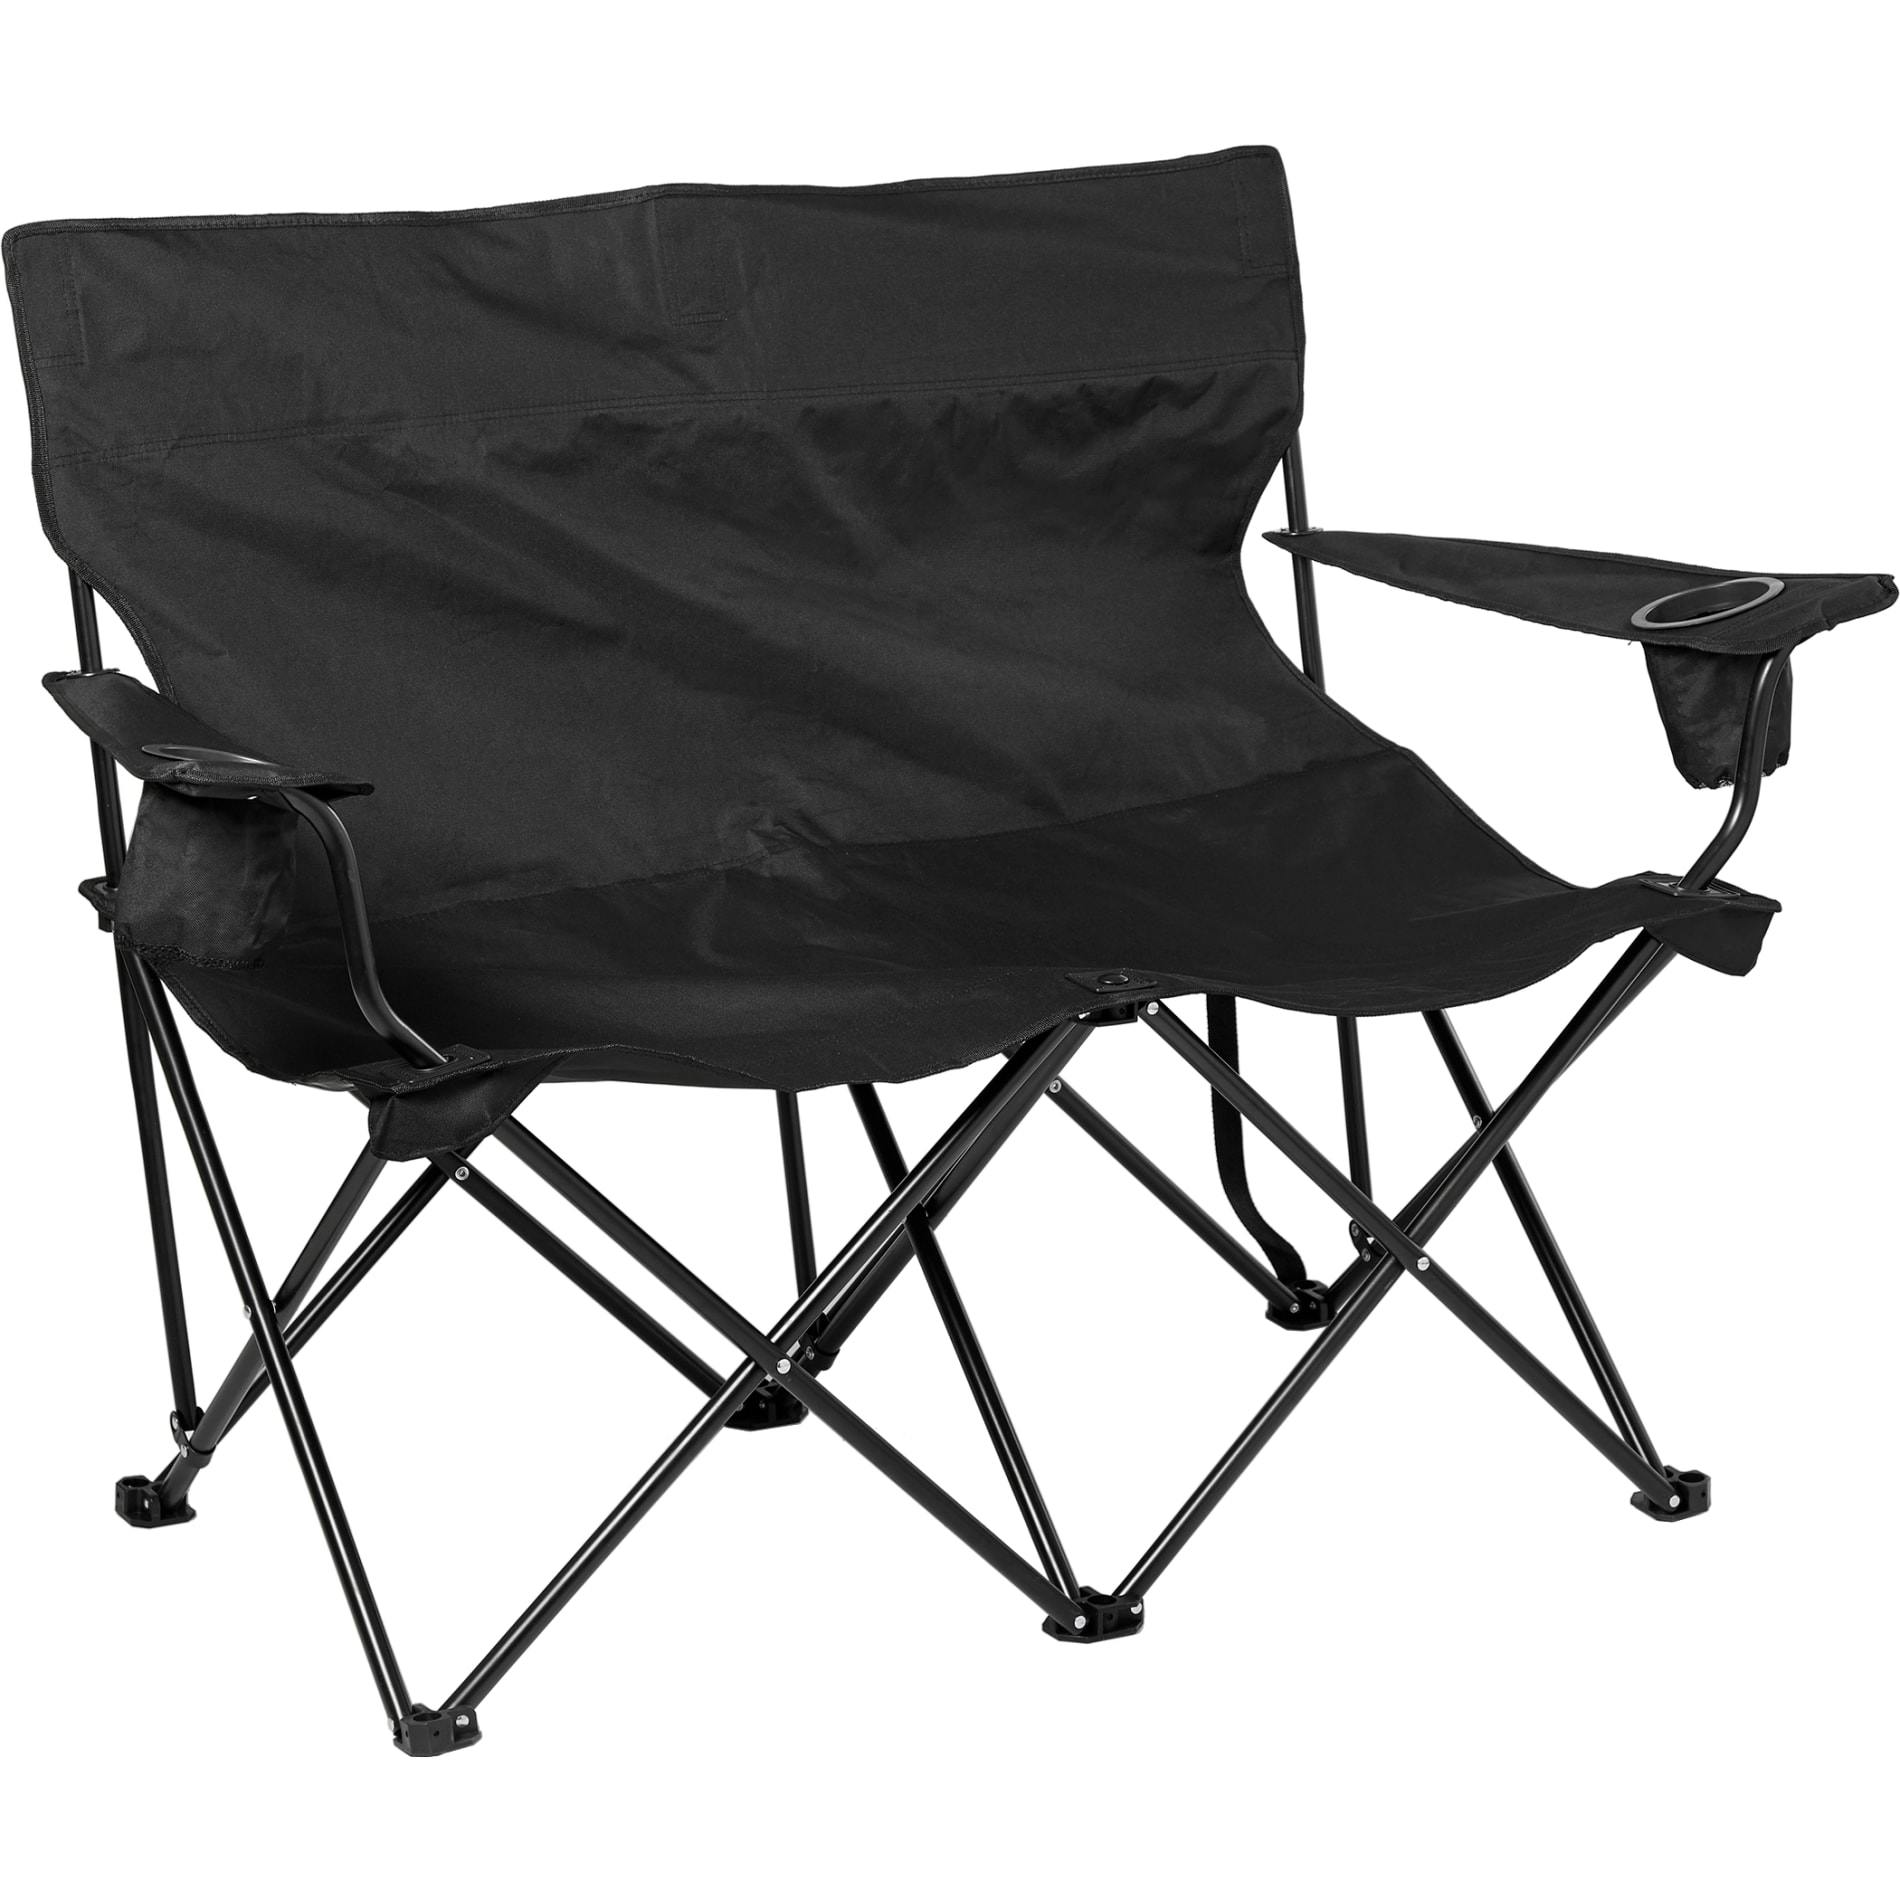 Double Seater Folding Chair - additional Image 3